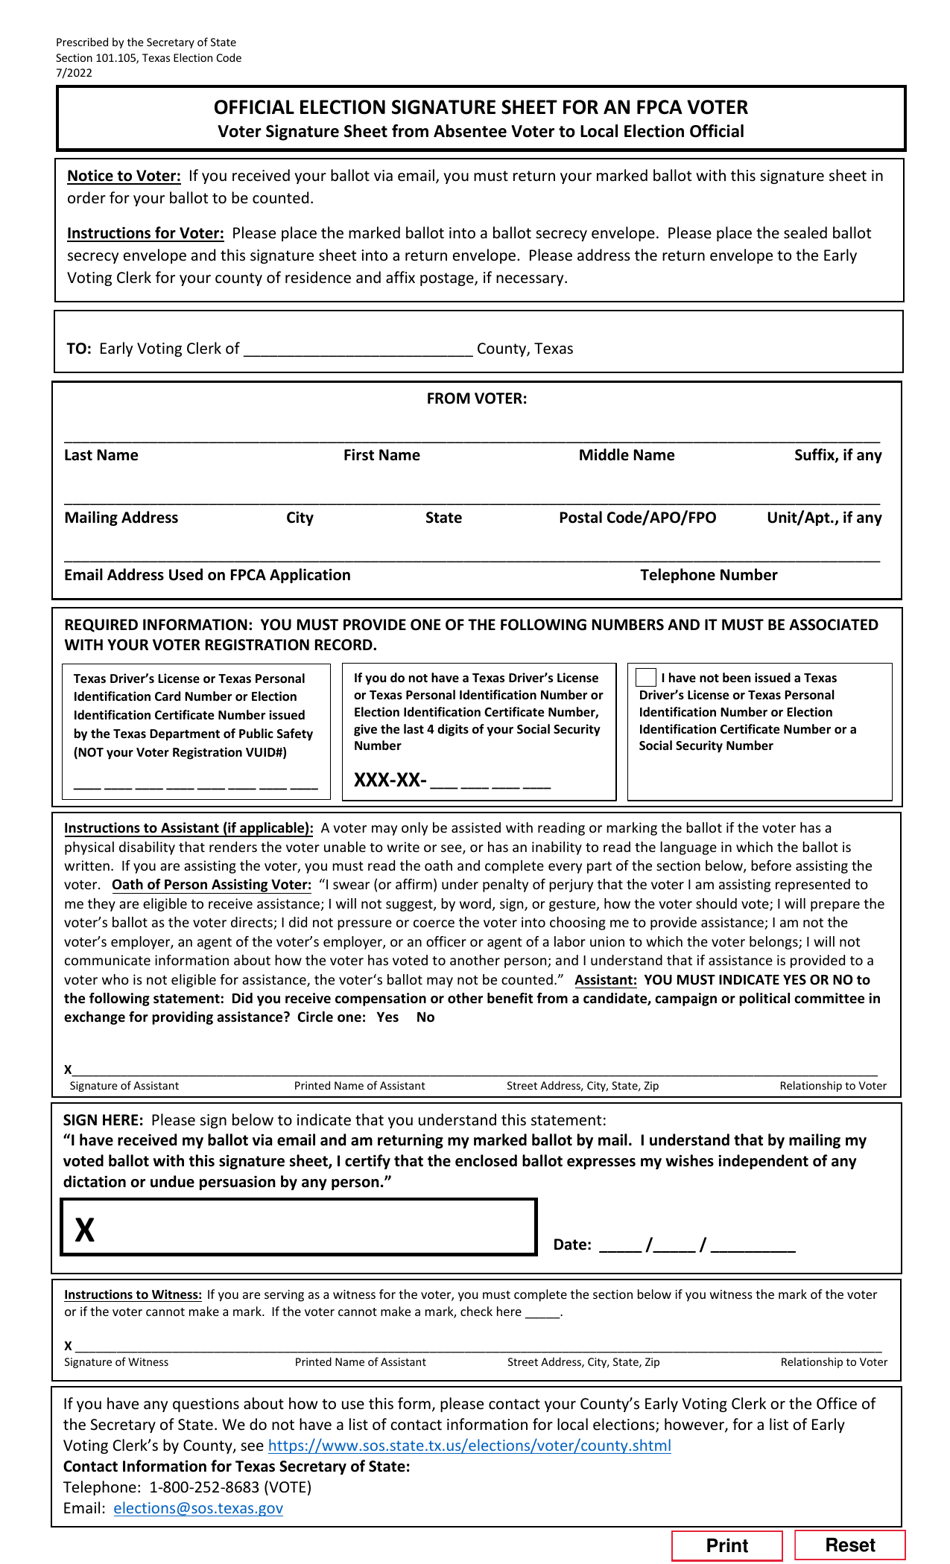 Form 6-37 Official Election Signature Sheet for an Fpca Voter - Texas (English / Spanish), Page 1